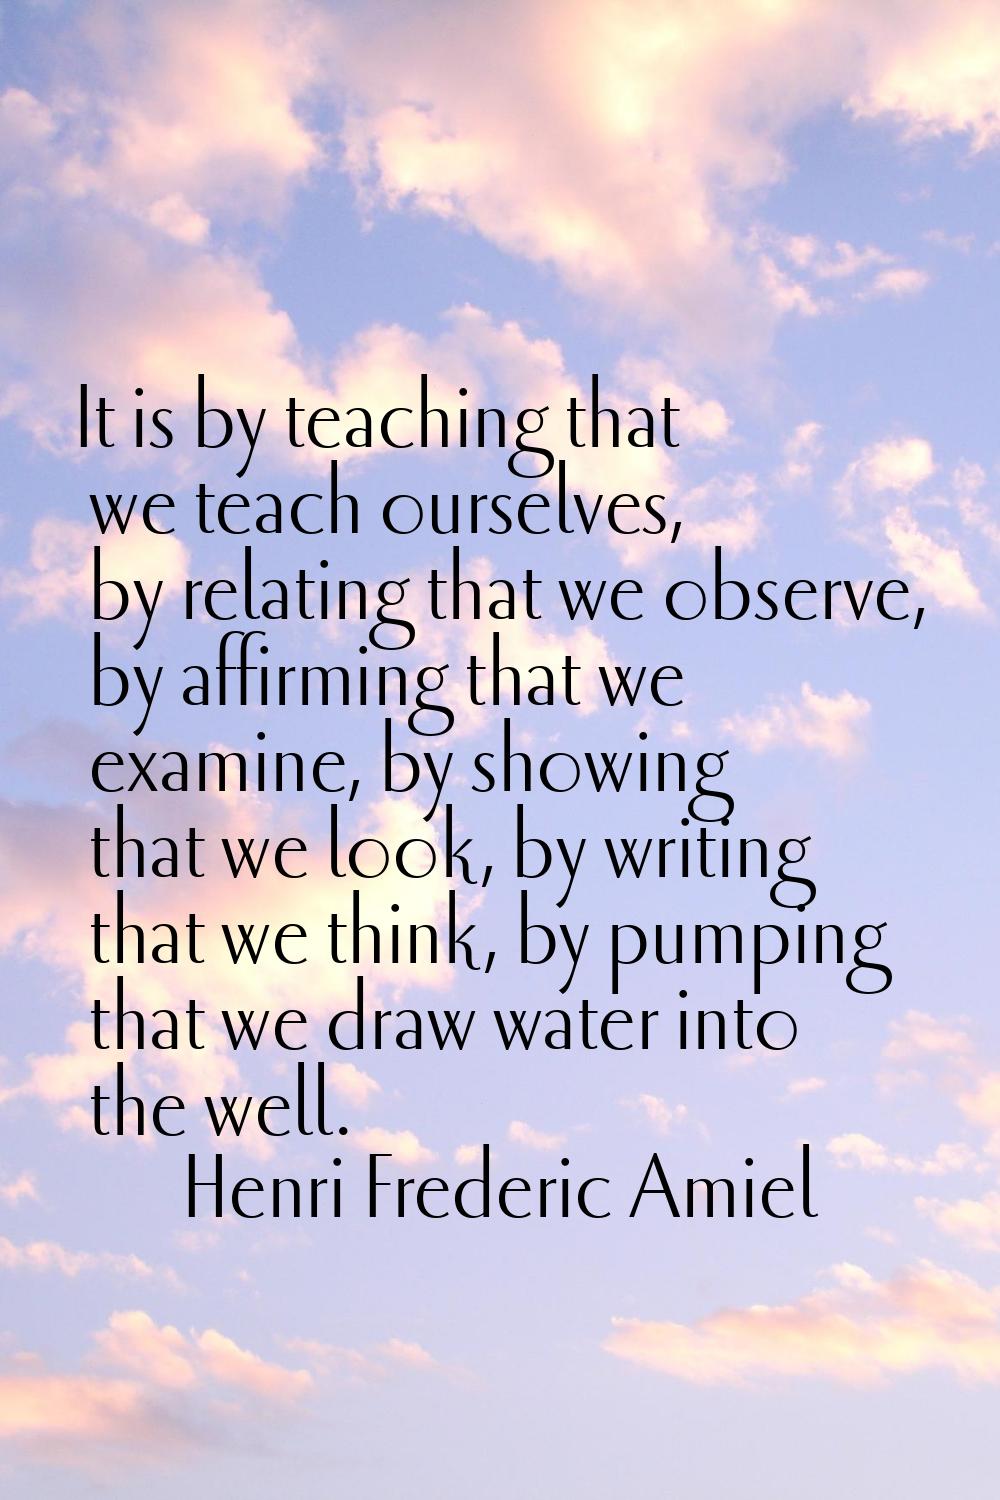 It is by teaching that we teach ourselves, by relating that we observe, by affirming that we examin